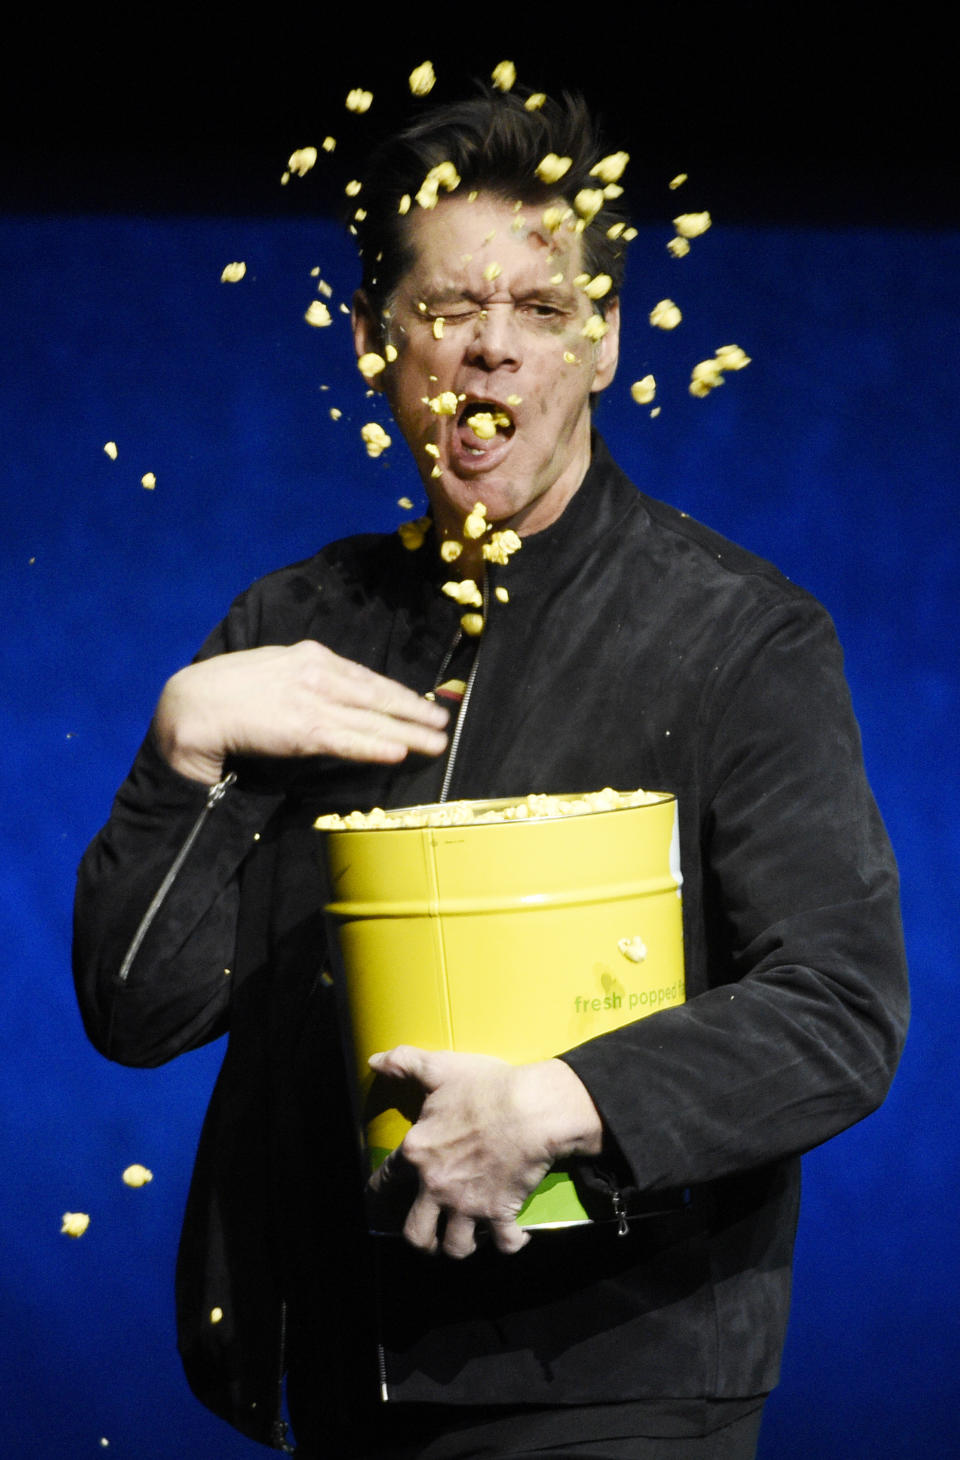 Jim Carrey, a cast member in the upcoming film "Sonic the Hedgehog," throws popcorn onto his face during the Paramount Pictures presentation at CinemaCon 2019 in Las Vegas on April 4, 2019. (Photo by Chris Pizzello/Invision/AP)